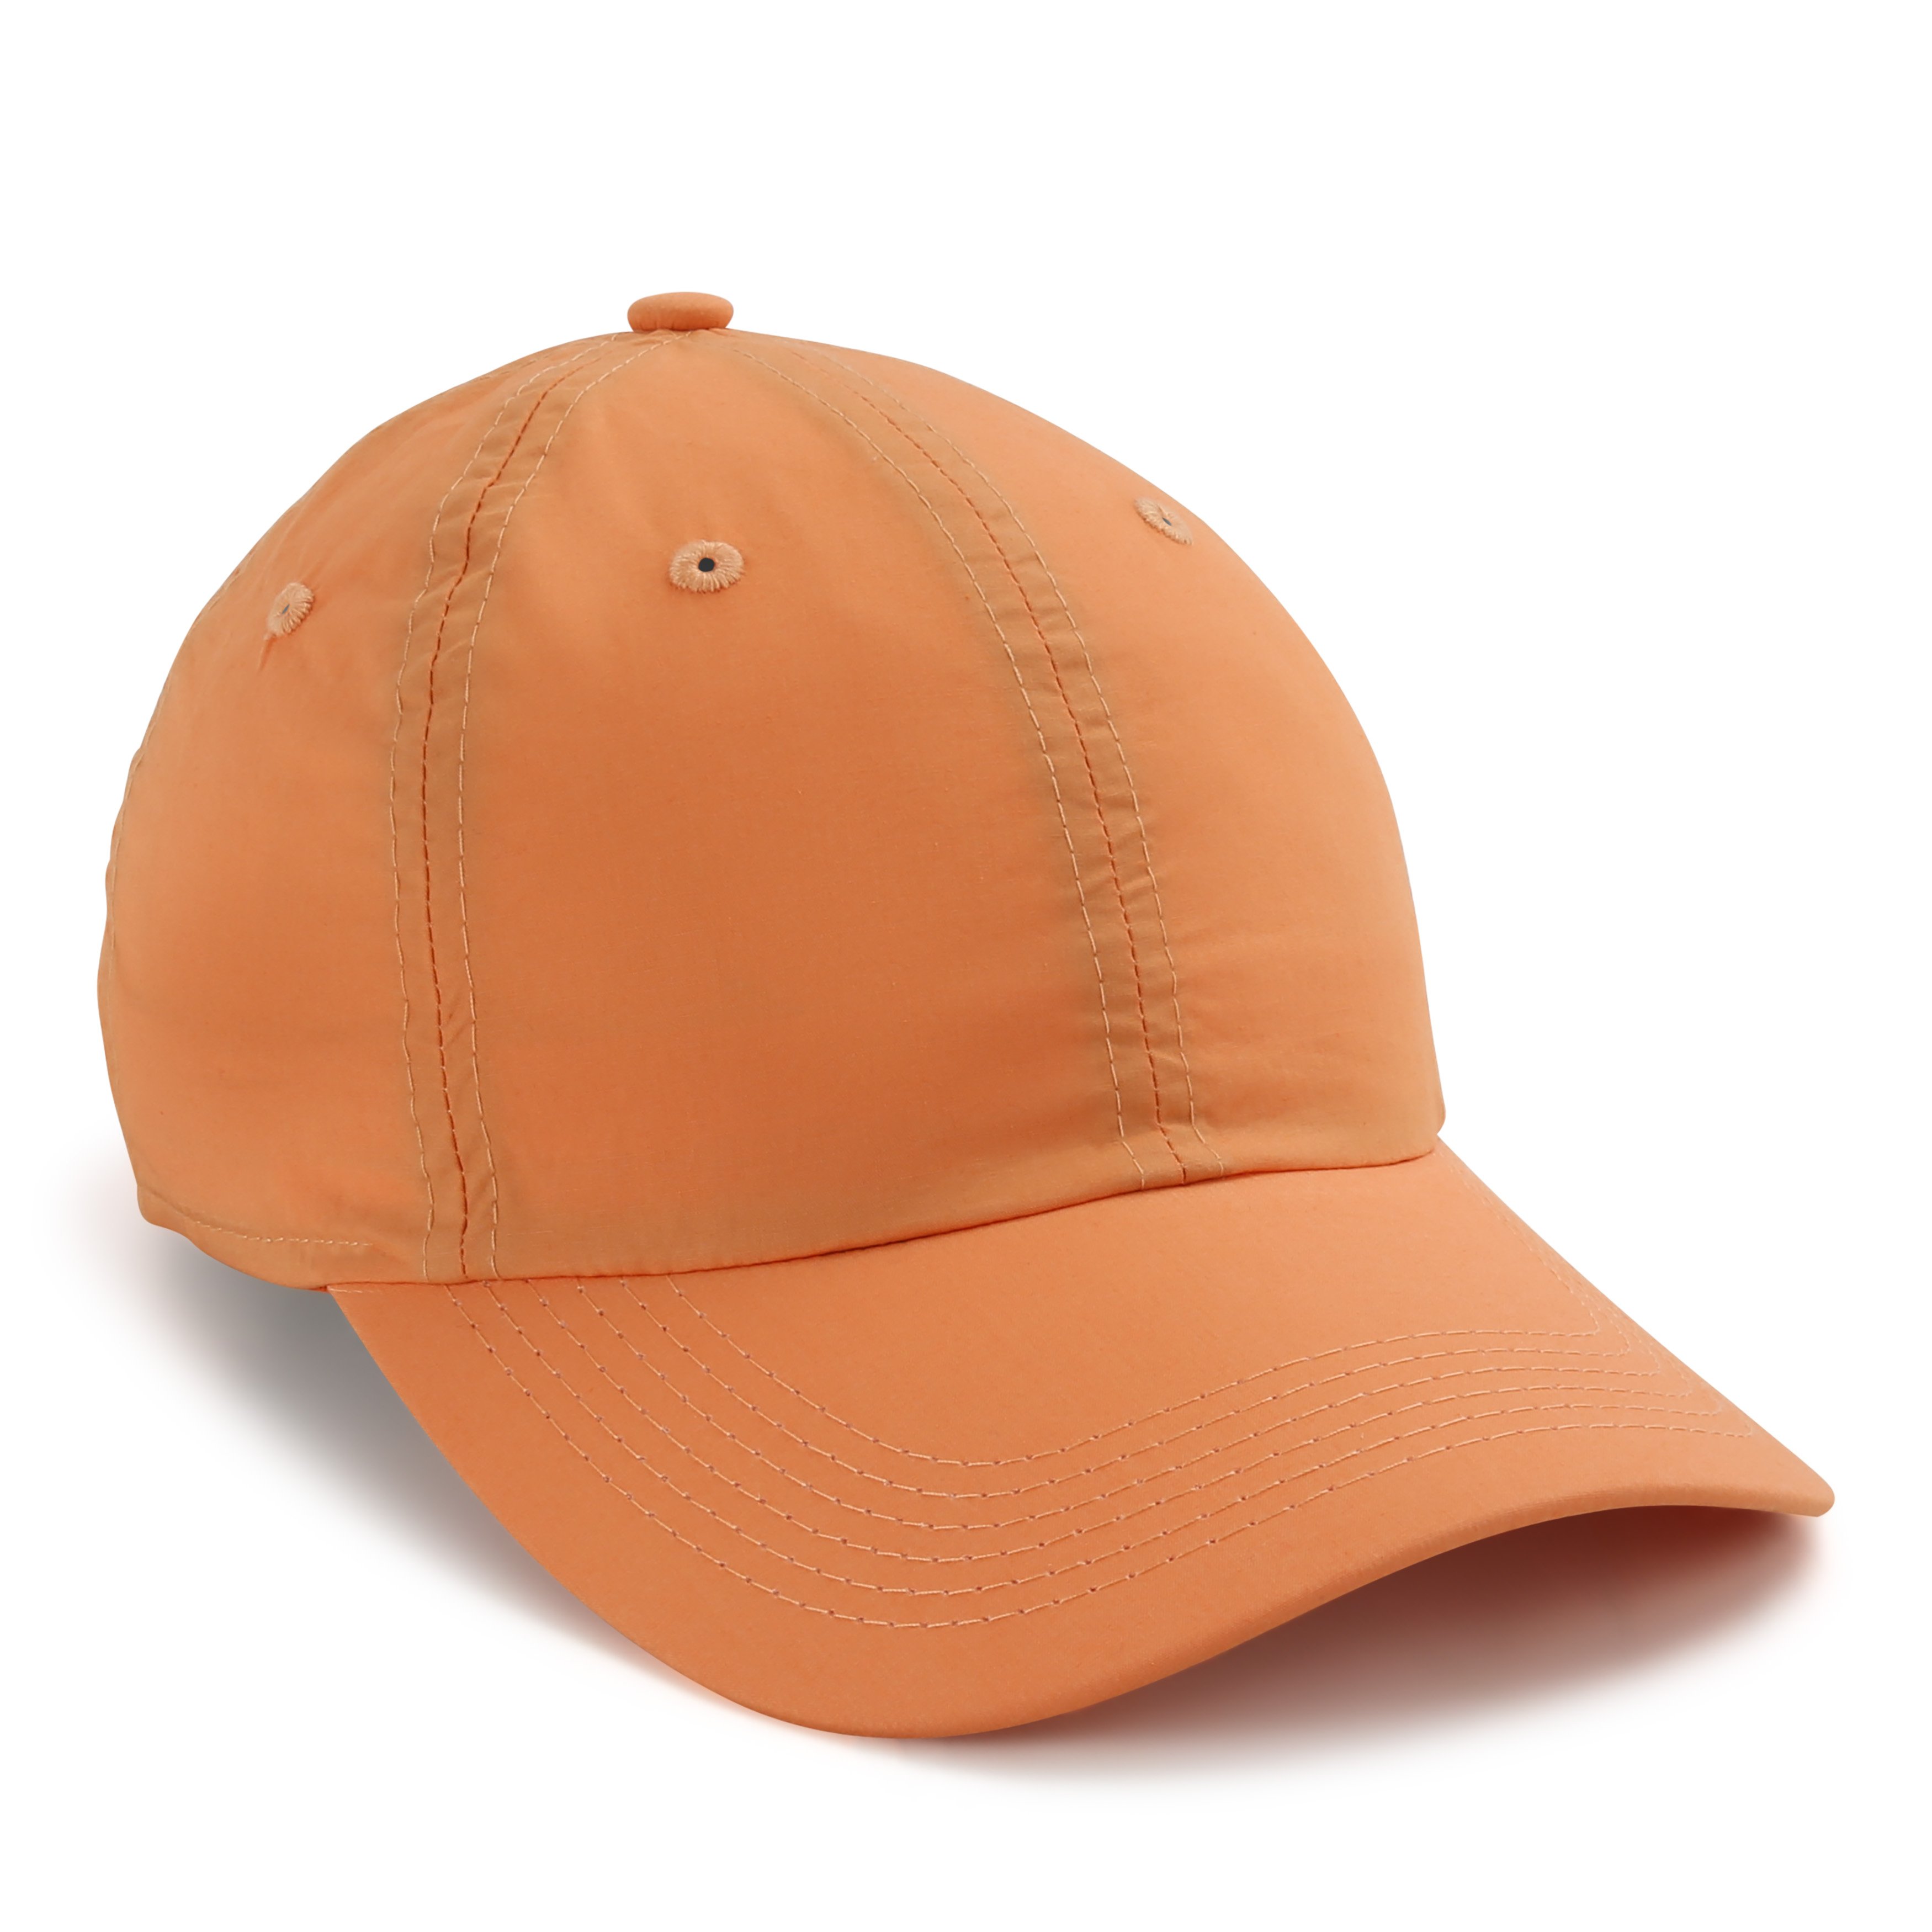 L110B - The Original Lightweight Small Fit-Adjustable Small Fit Cotton Cap